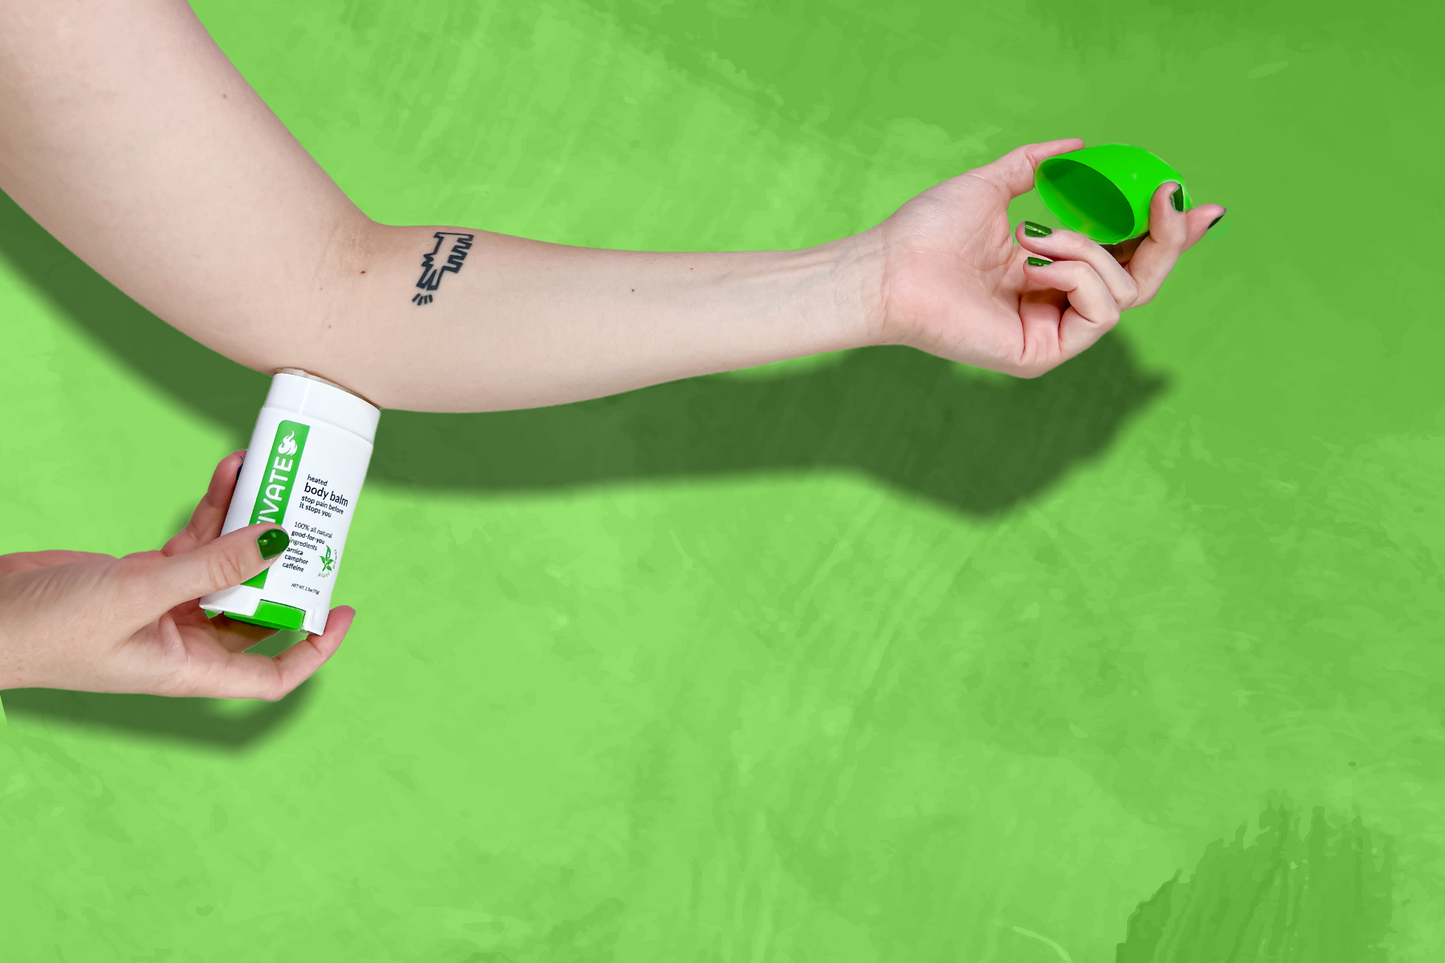 caucasian female with keith haring dog tattoo applying a green and white, "activate pain relief body balm" onto a sore elbow prior to activity to prevent further injury.